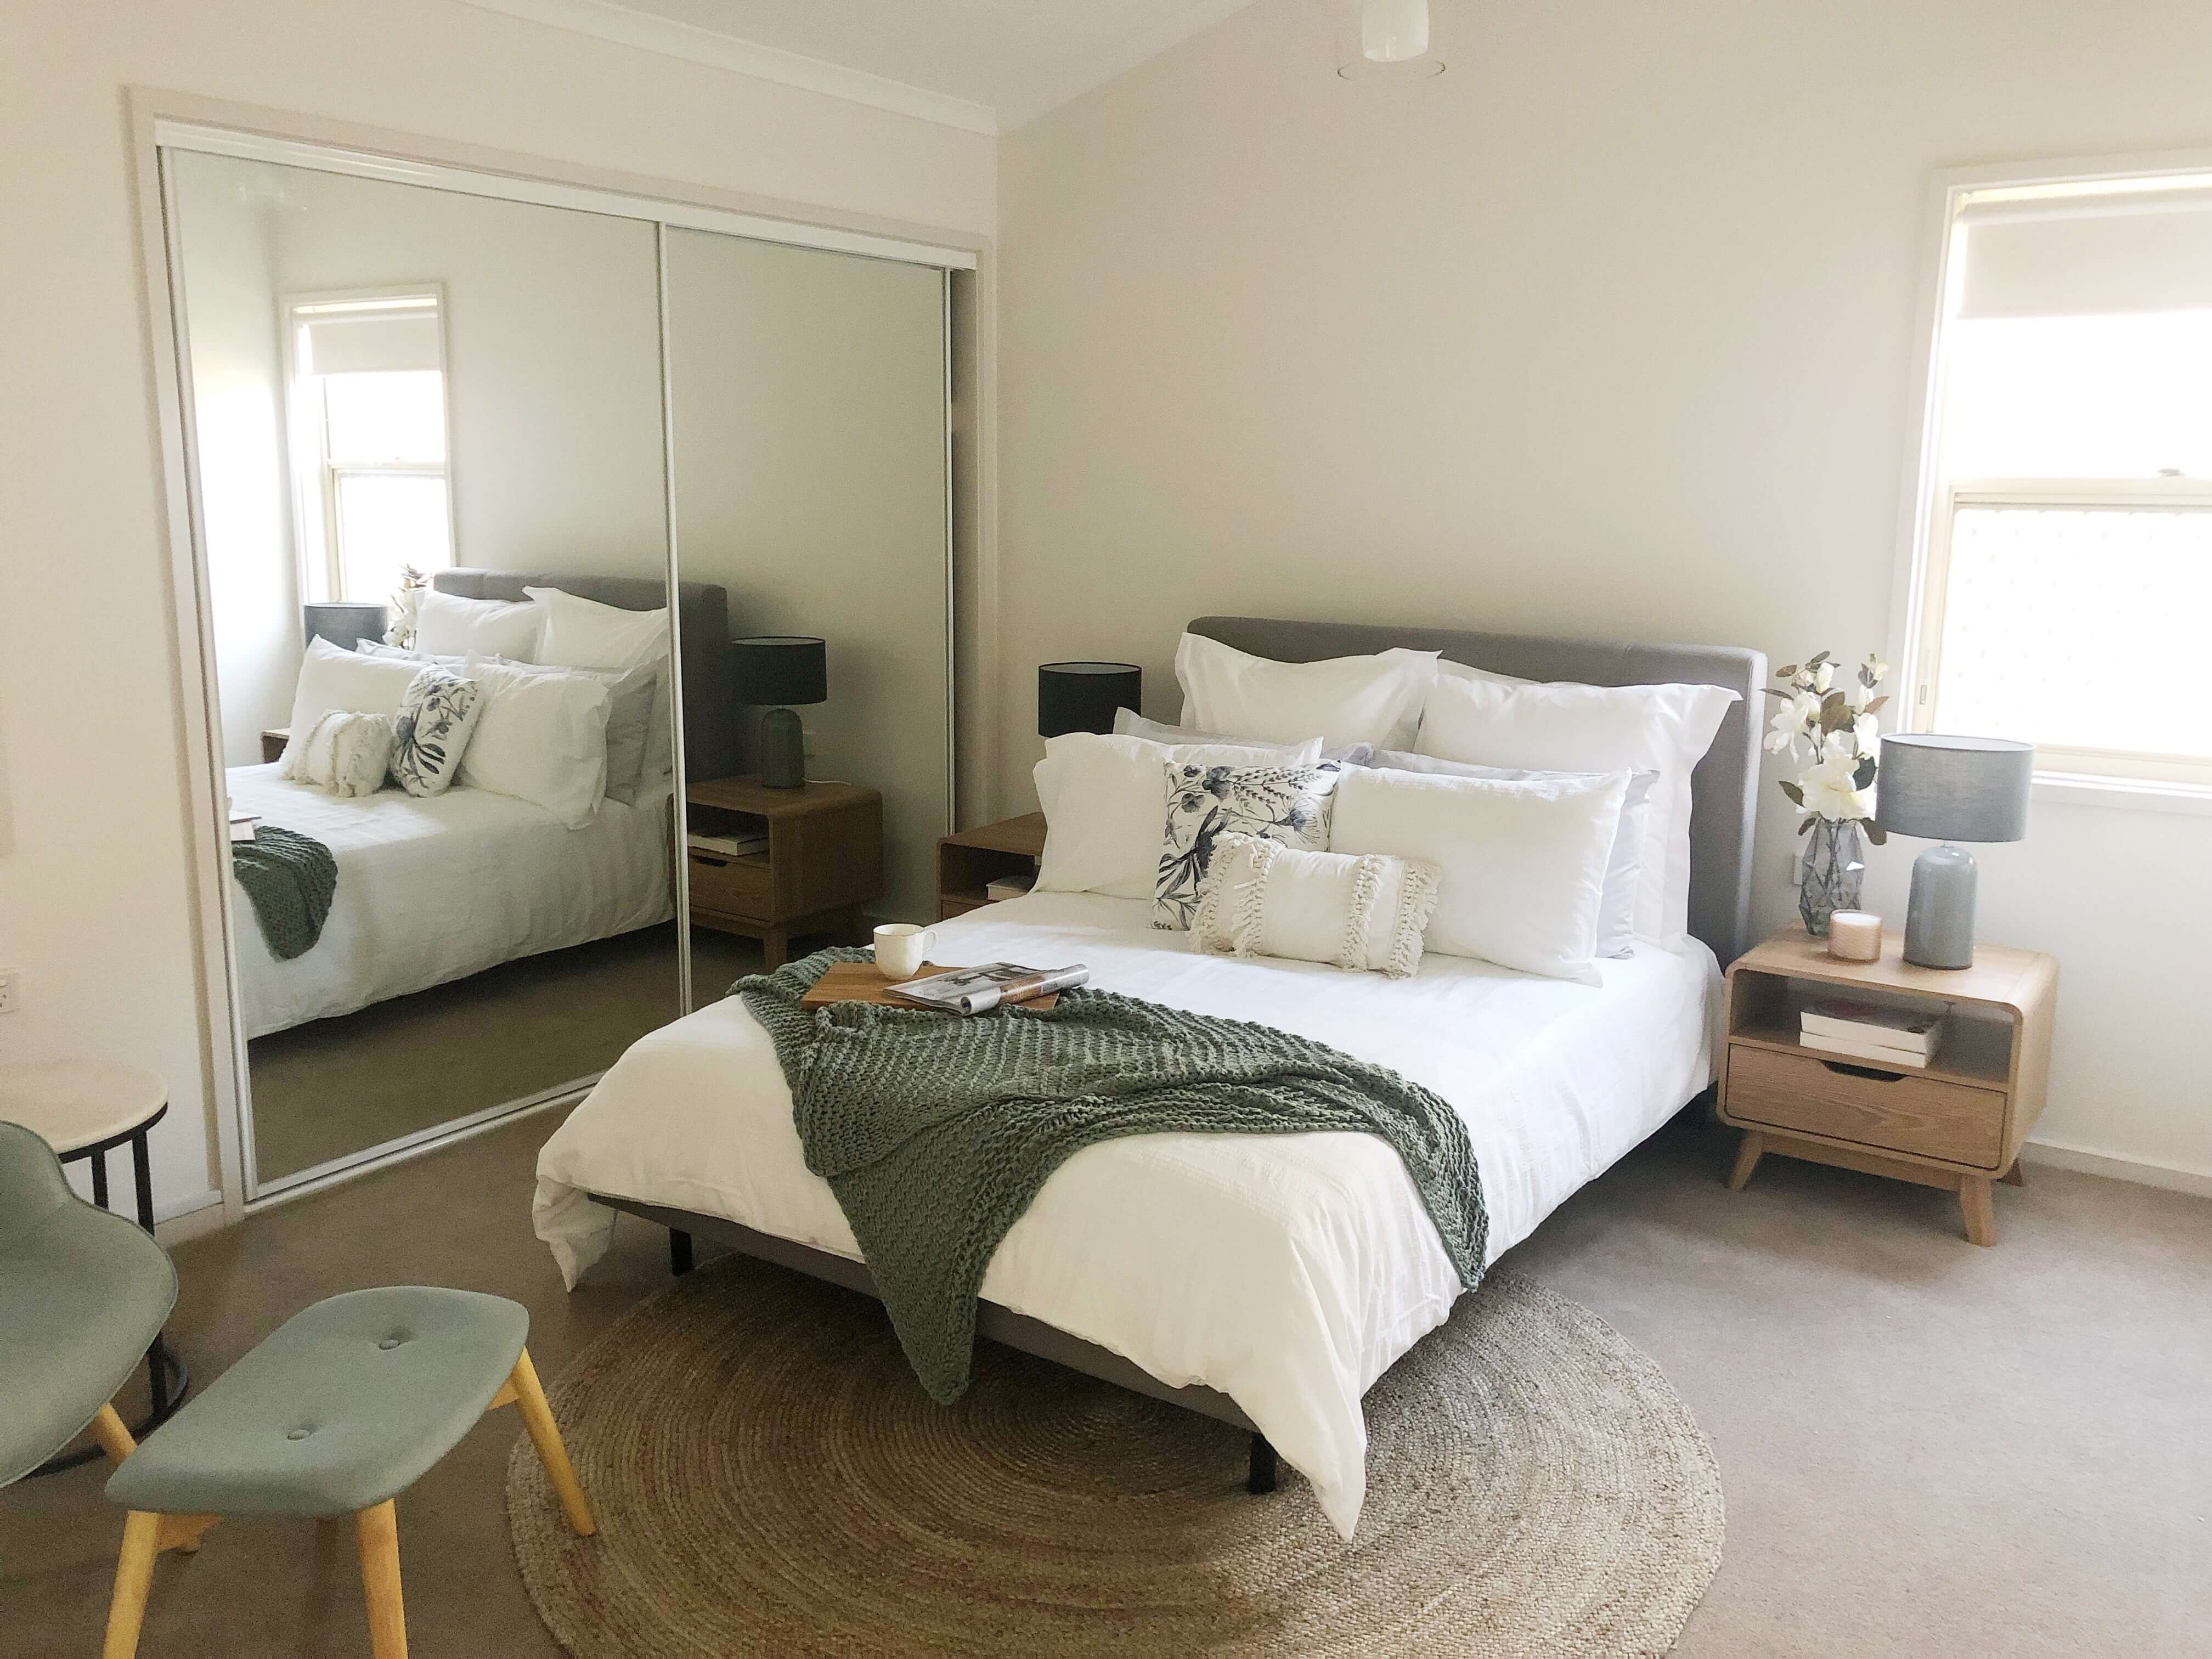 A modern bedroom in Whiddon's Redhead Retirement Village, an aged care home in Newcastle, NSW.